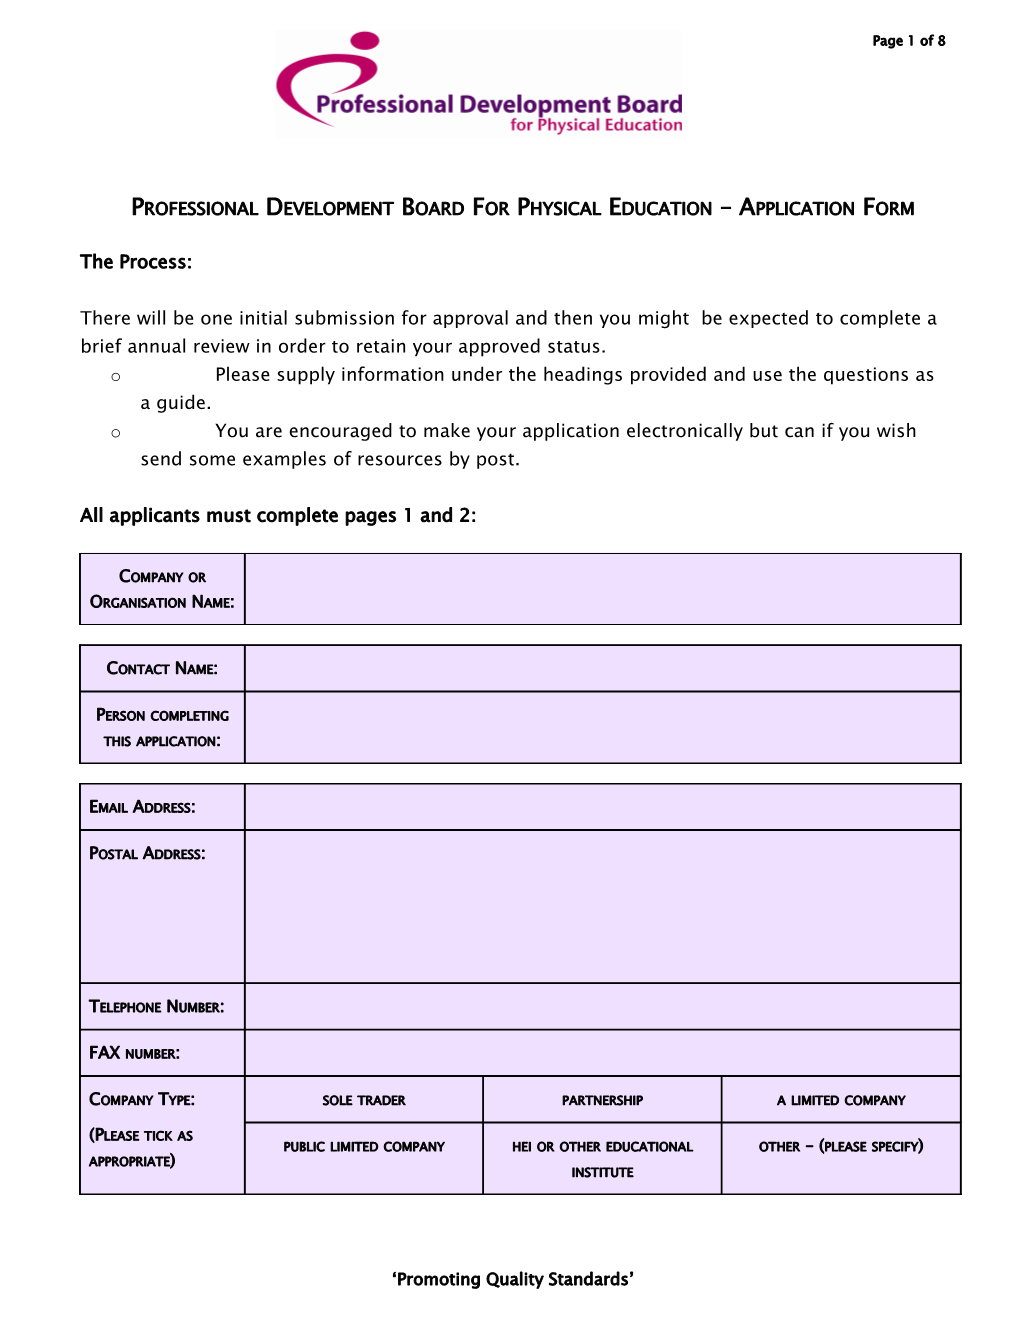 Professional Development Board for Physical Education Application Form